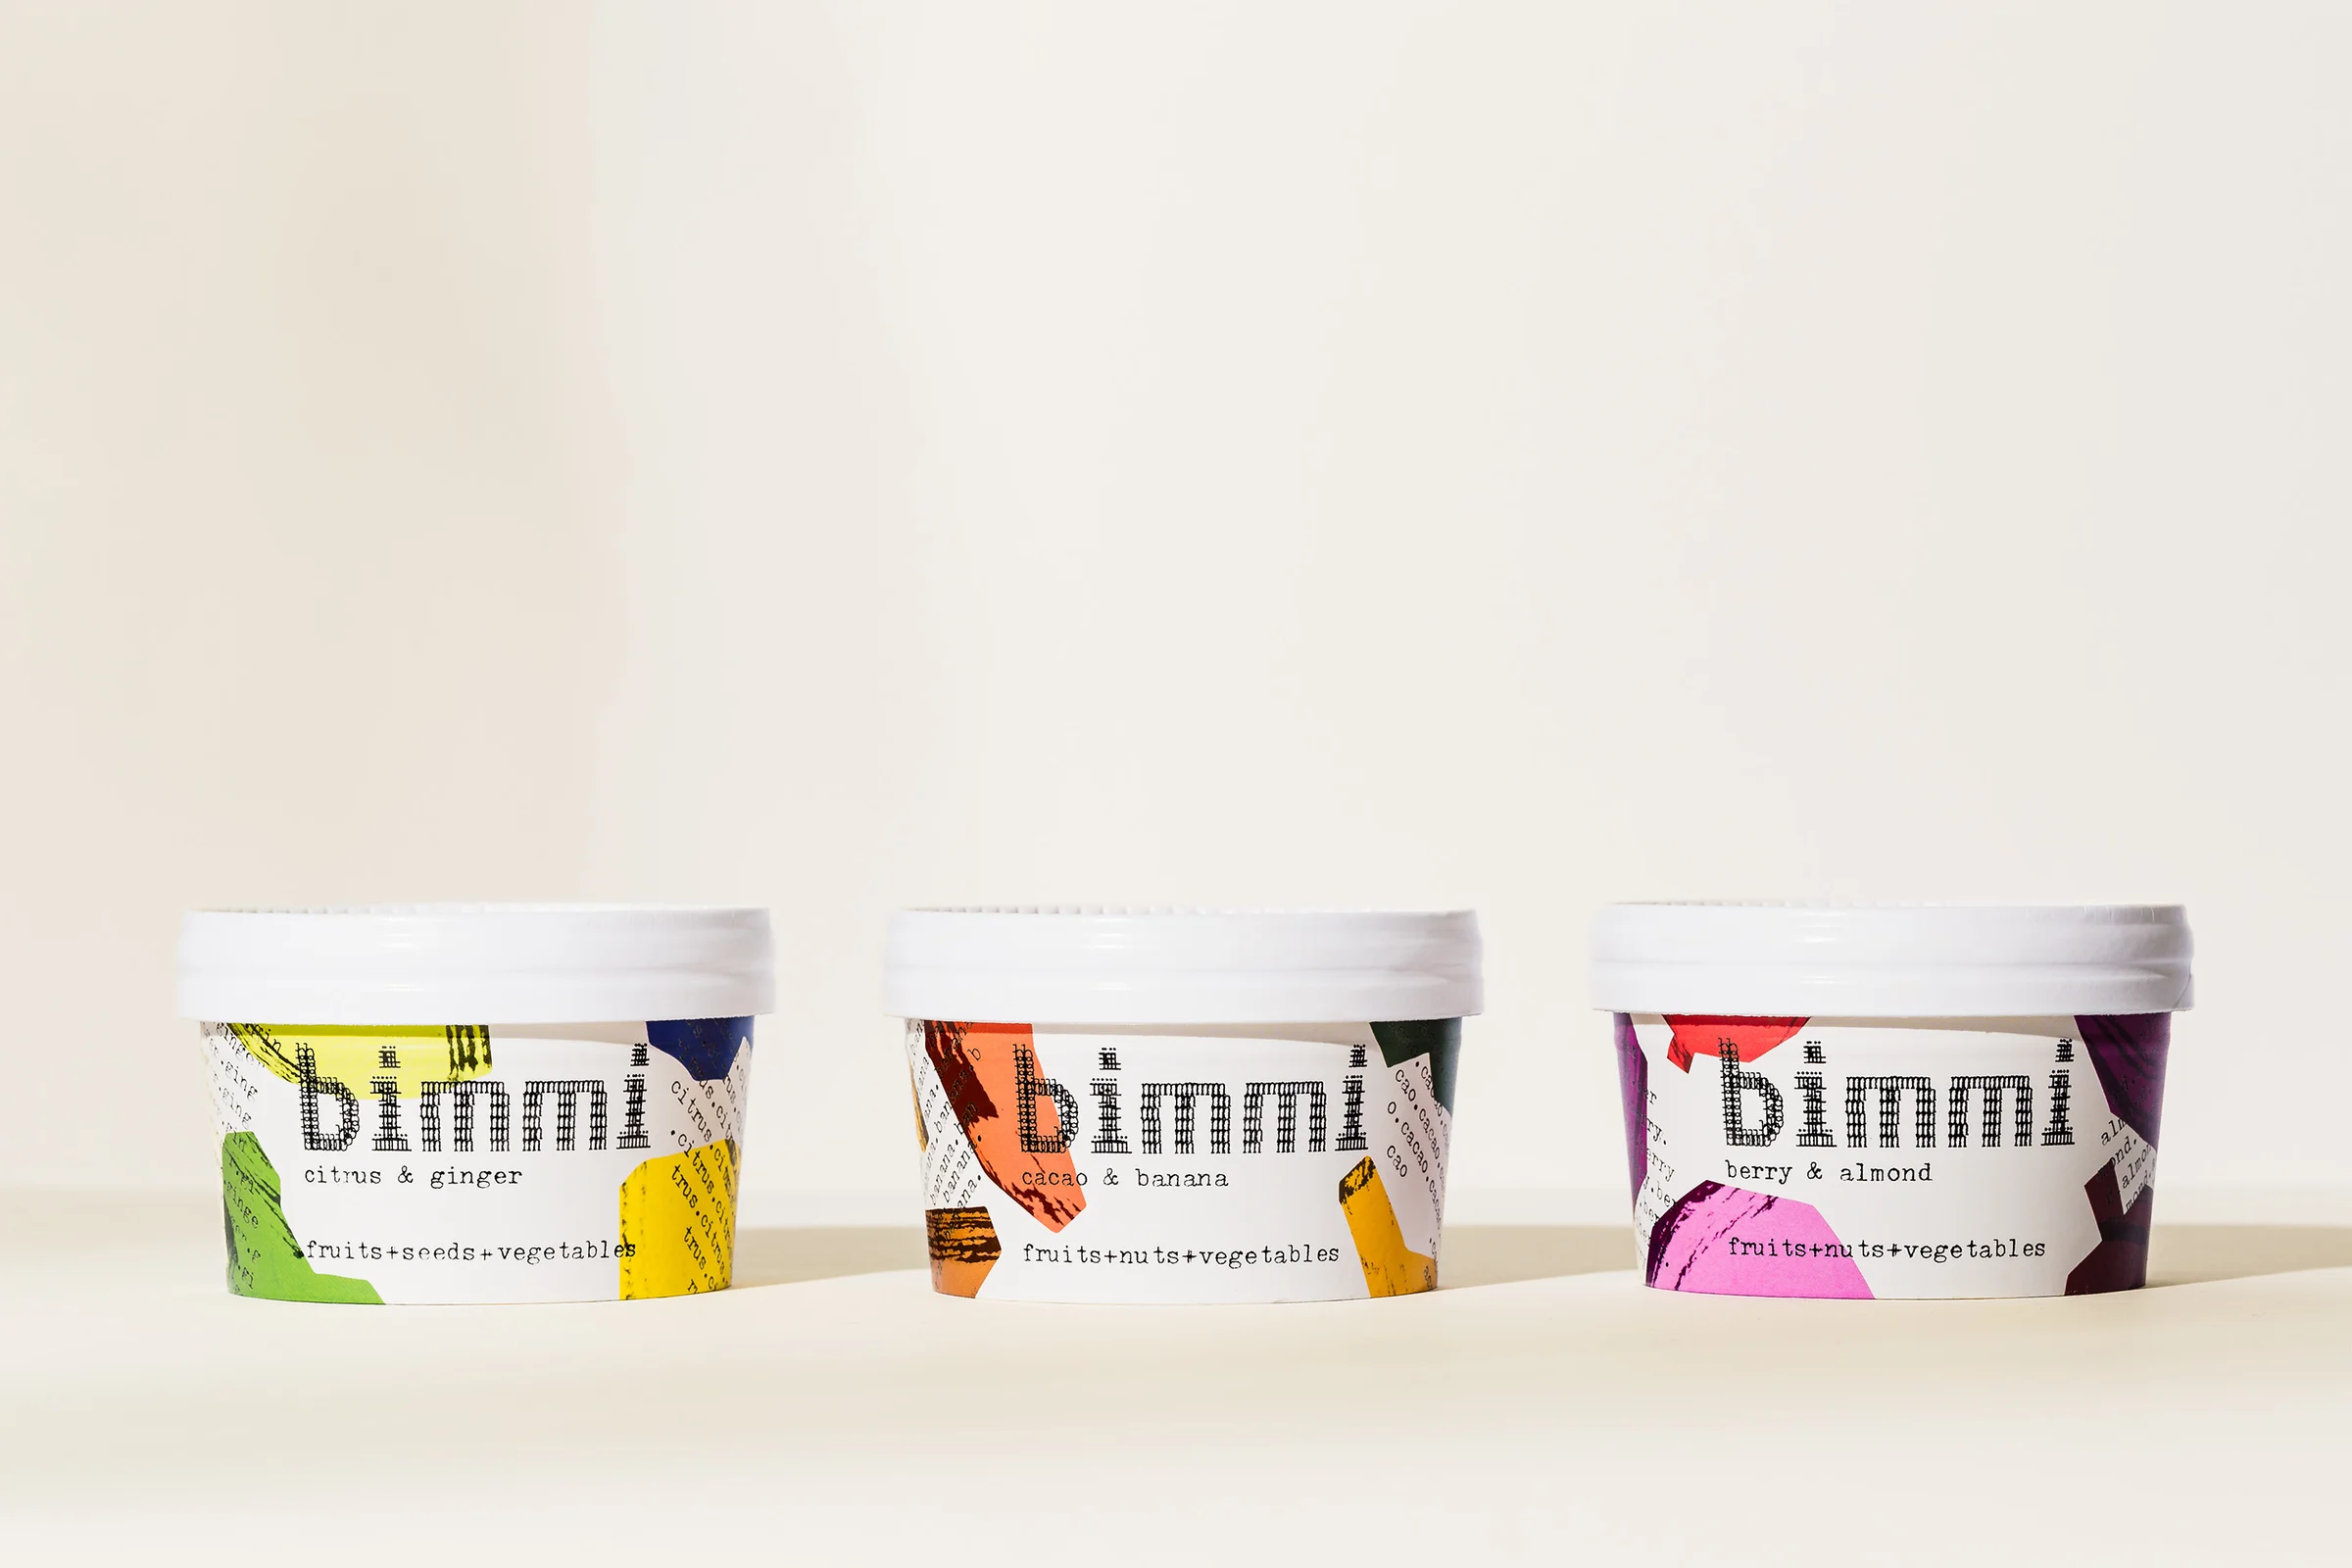 Logotype, packaging and concrete poetry collage designed by Swedish design studio Bedow for frozen smoothie brand Bimmi. 